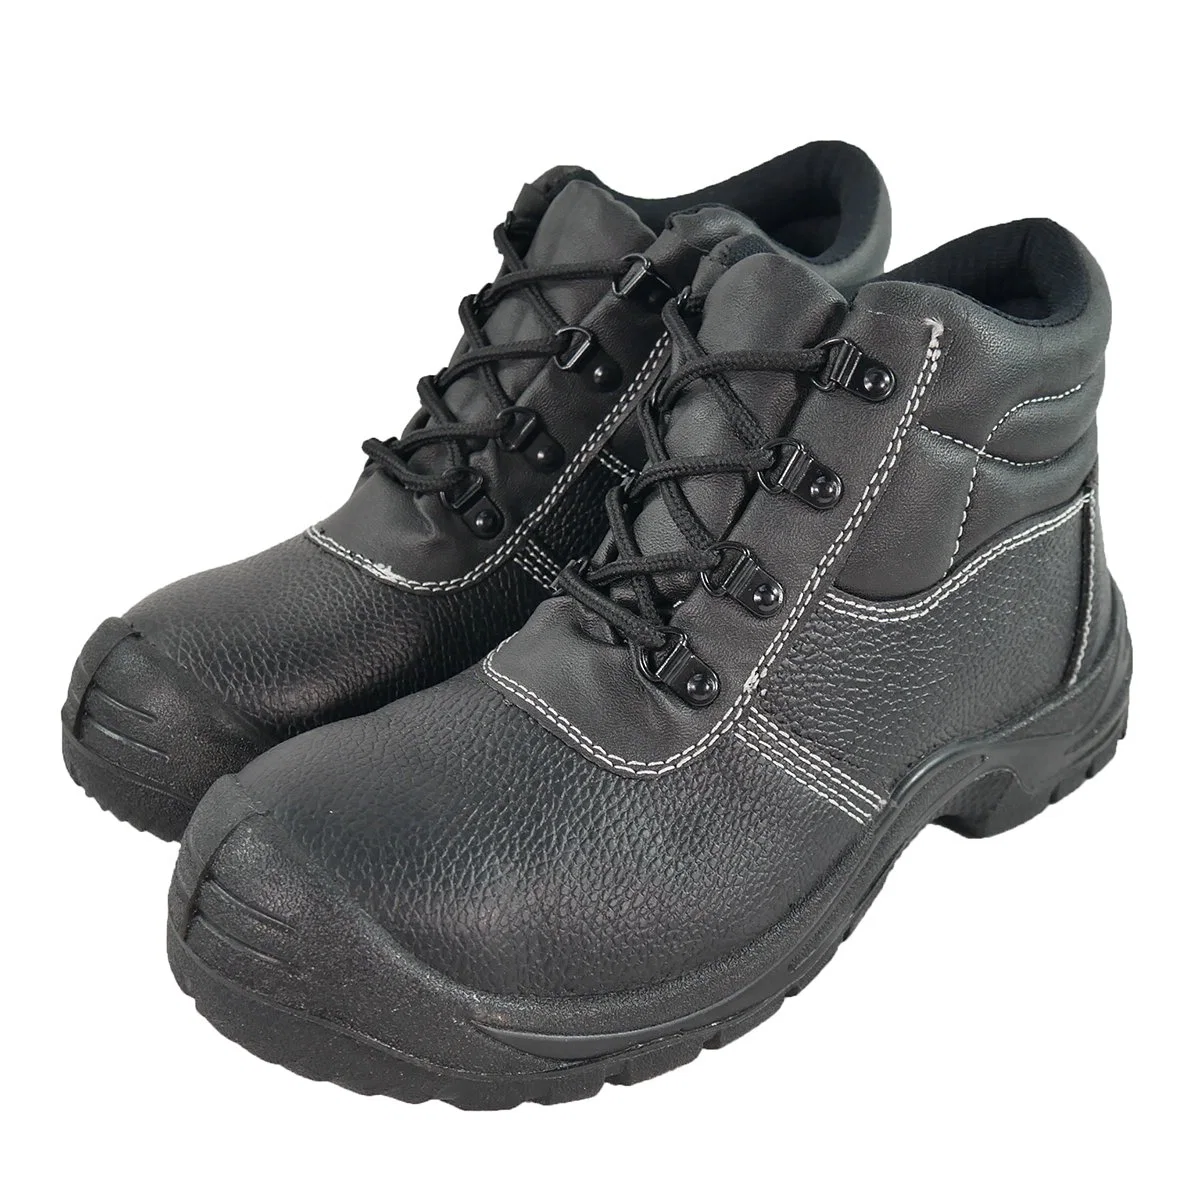 New Hot Selling Industrial Protective Work Casual Sneakers Iron Toe Safety Shoes Men Protective Black Shoes